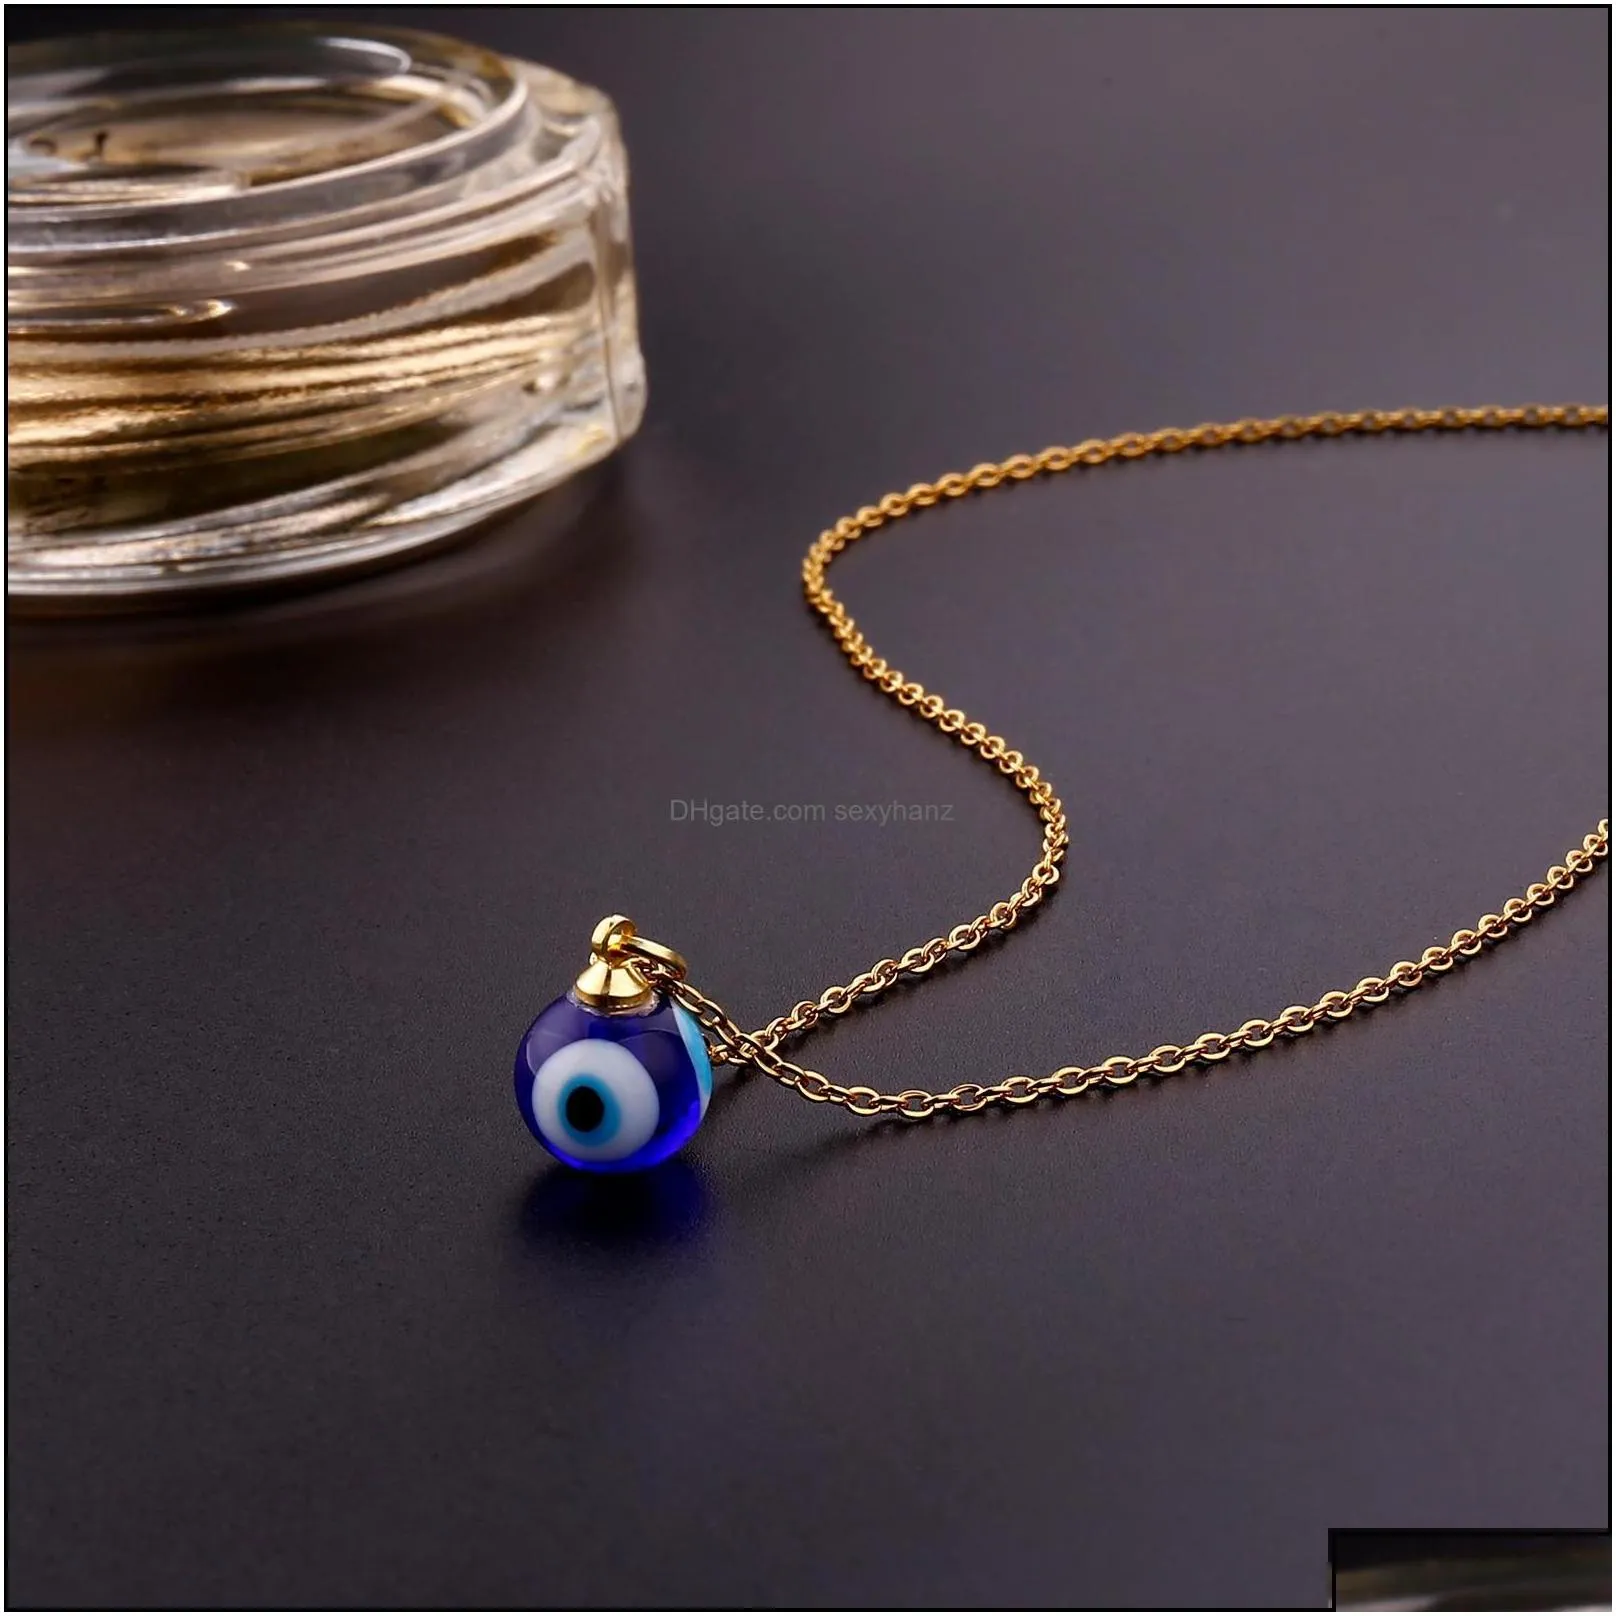 pendant necklaces pendants jewelry evil eye chain necklace blue eyes amet ojo turco kabh protection dhs97